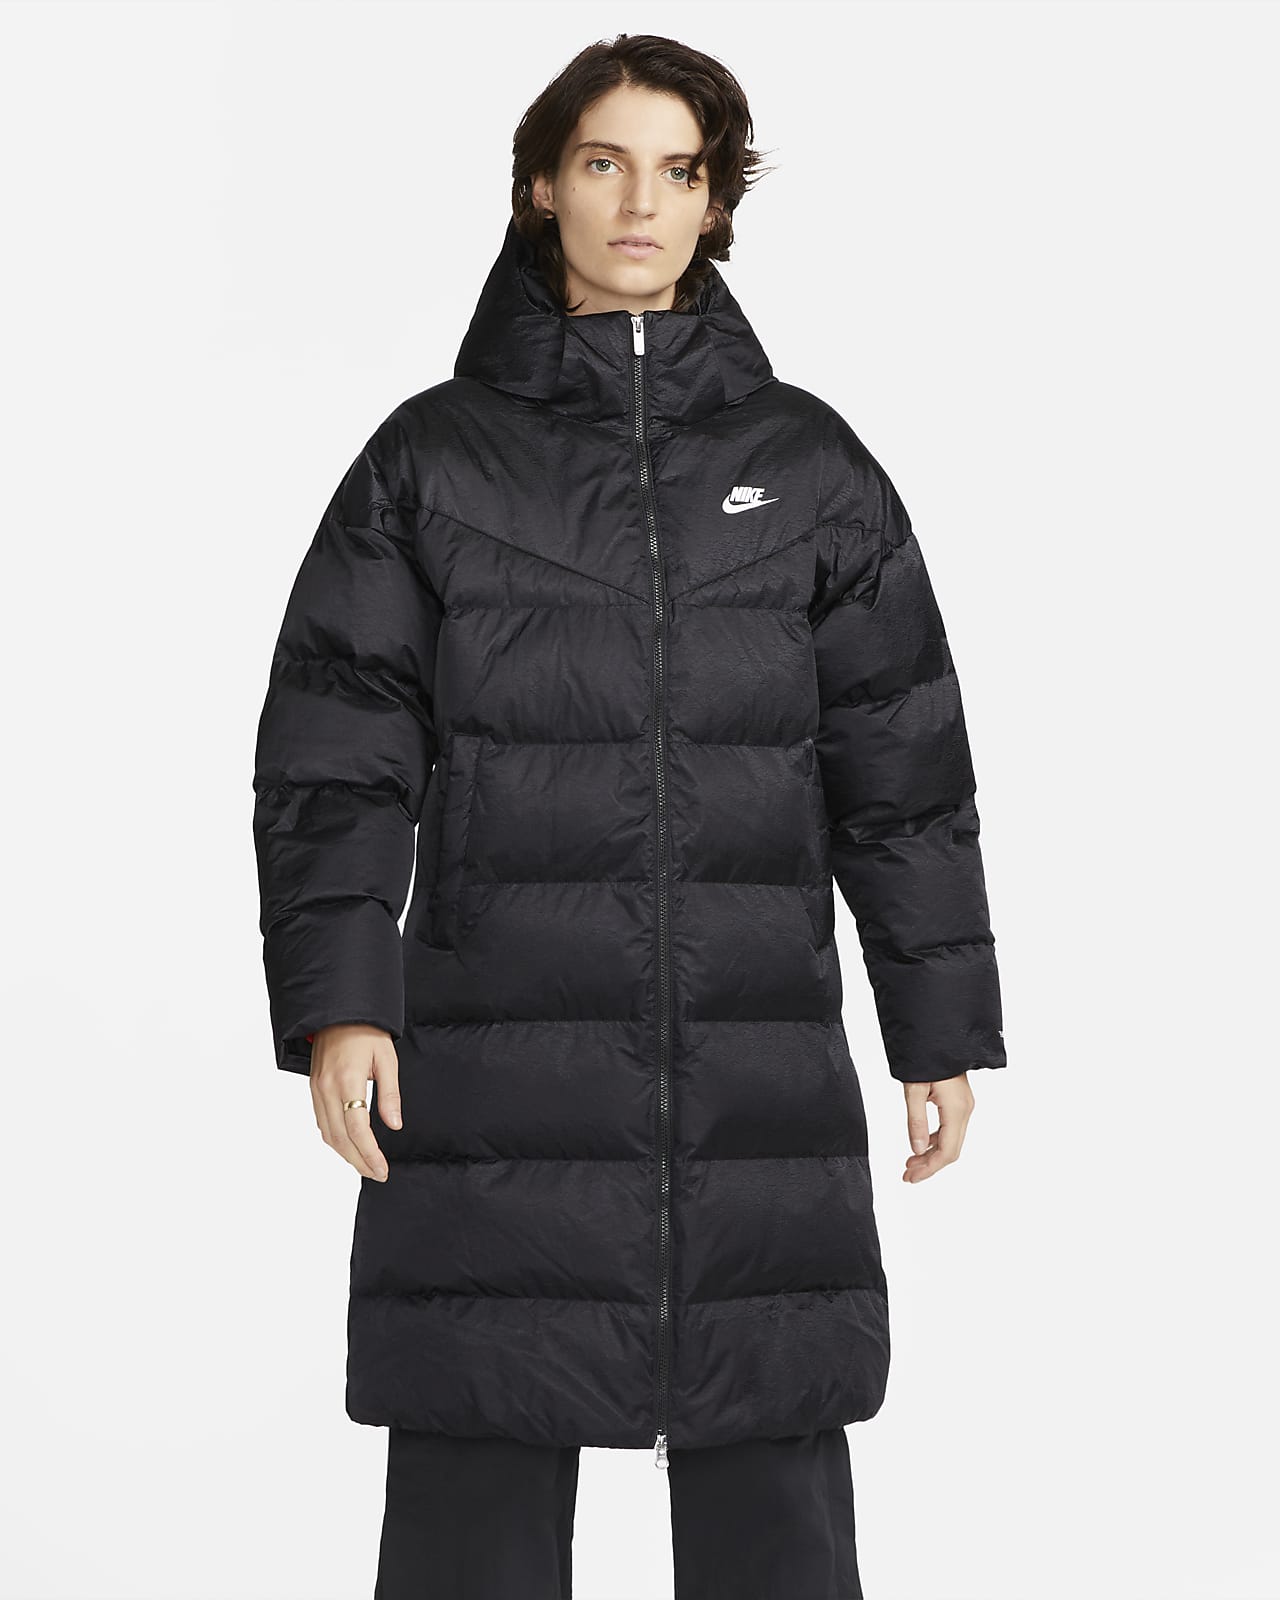 Nike Sportswear Therma-FIT City Series Women's Synthetic-Fill Shine Parka